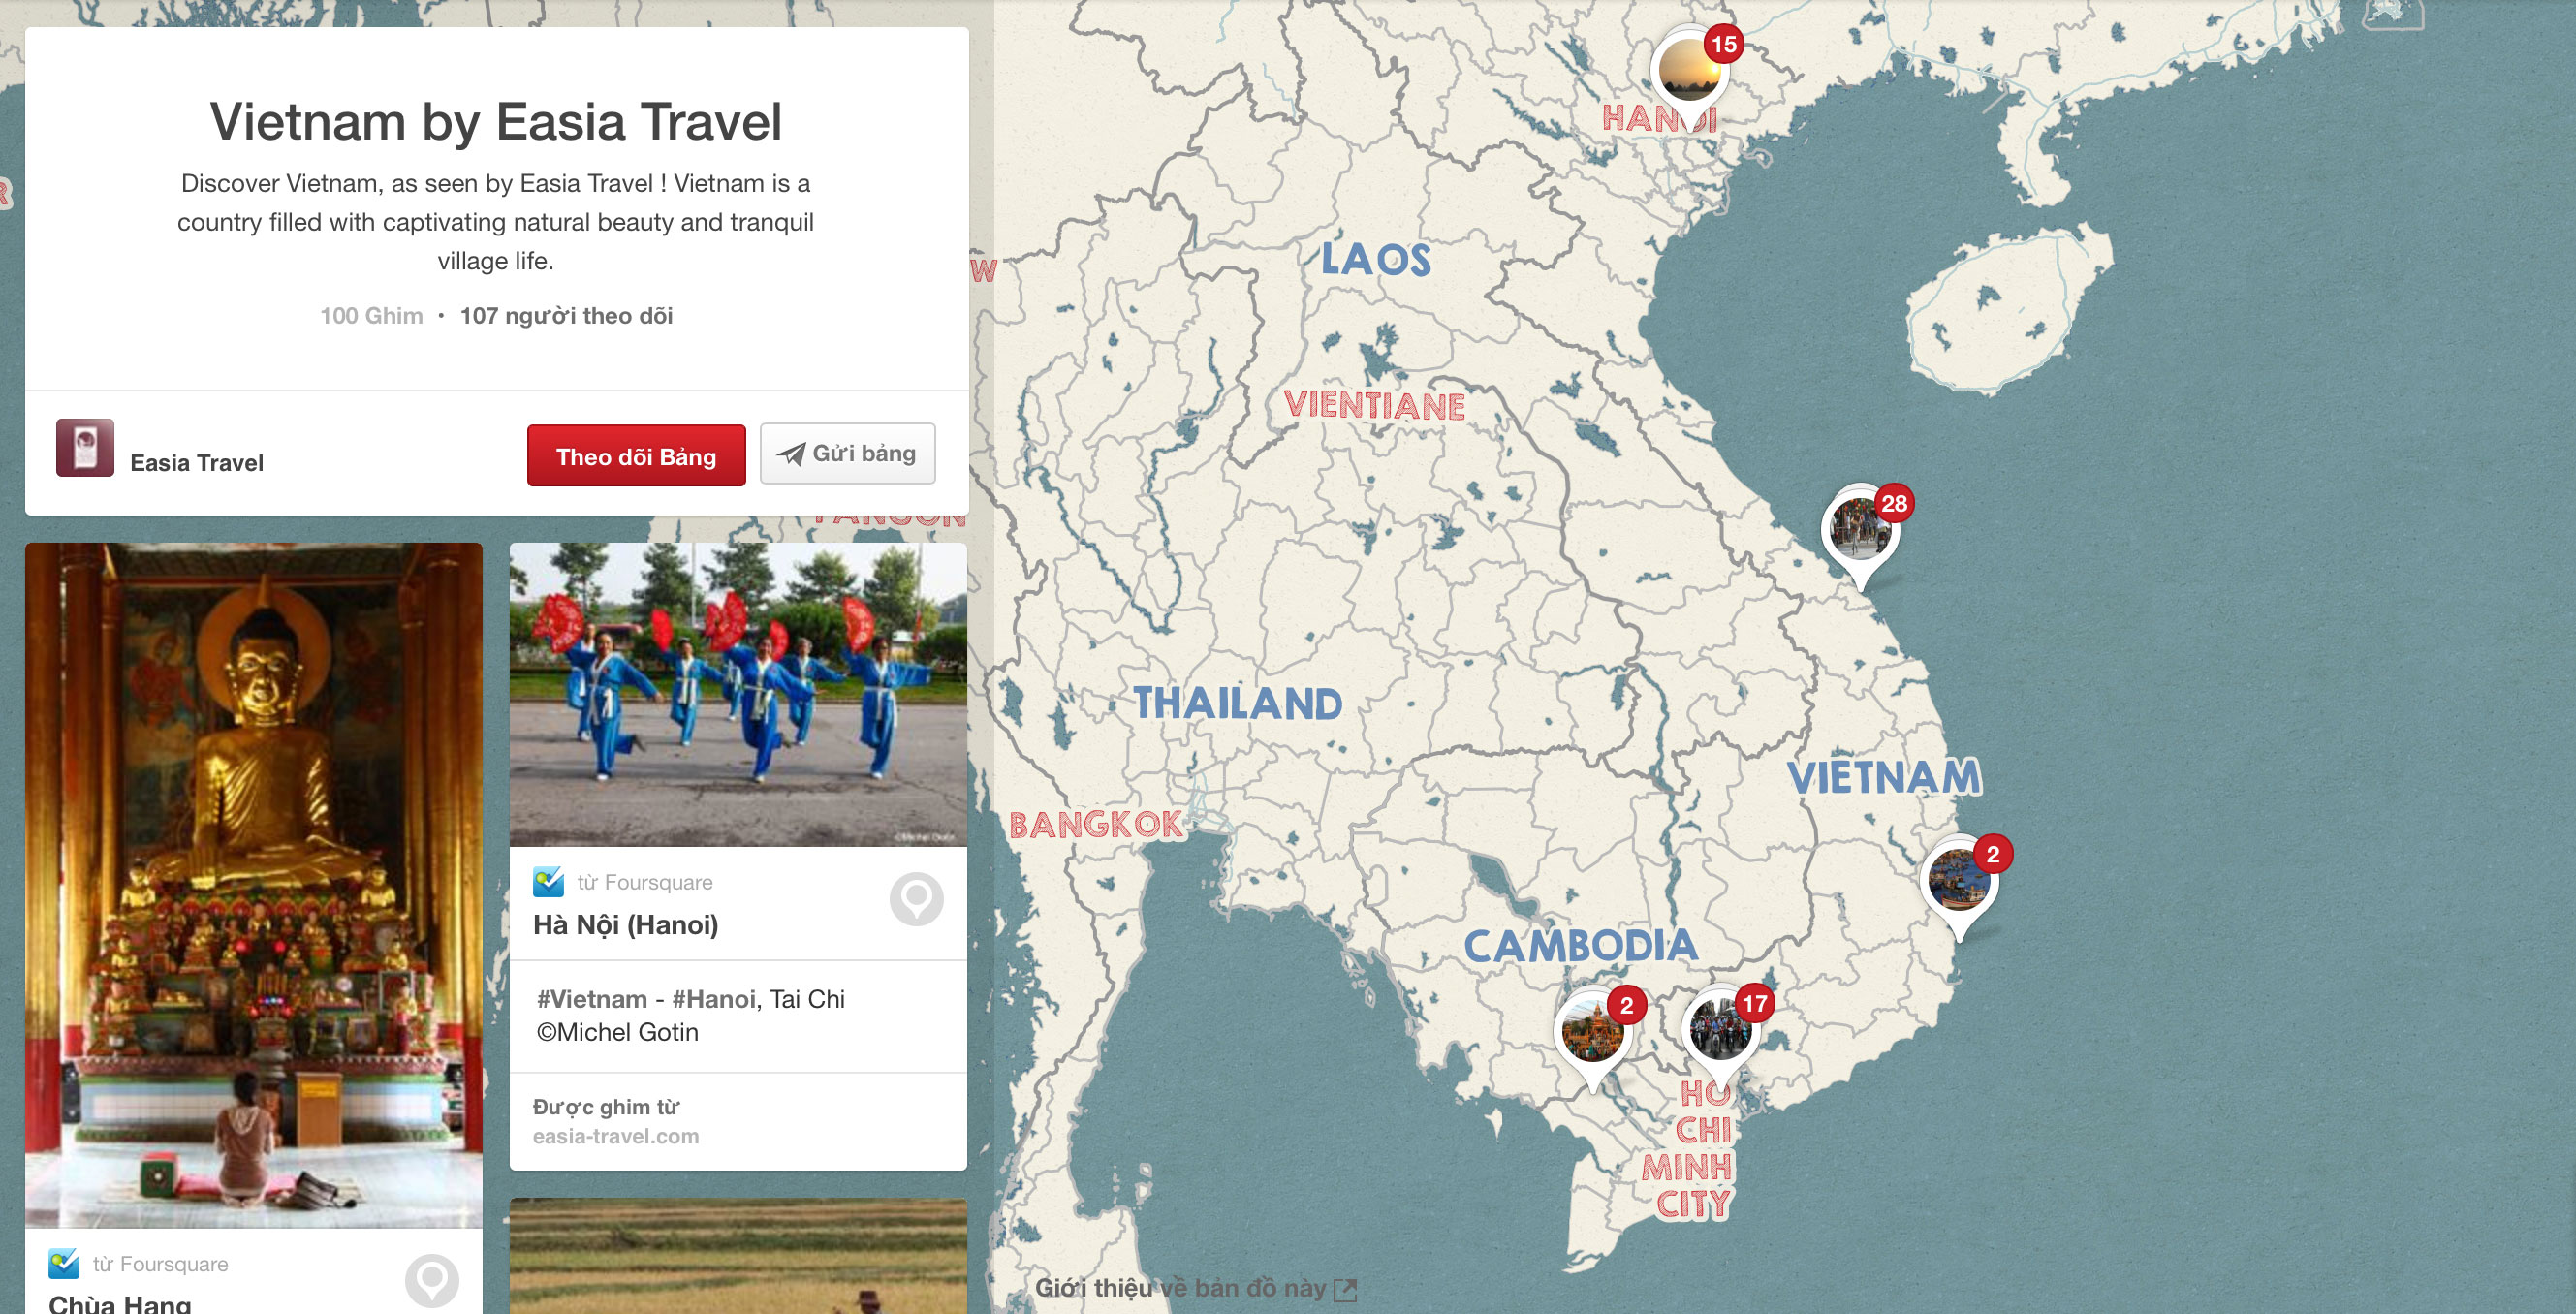 Map of Vietnam by Easia Travel